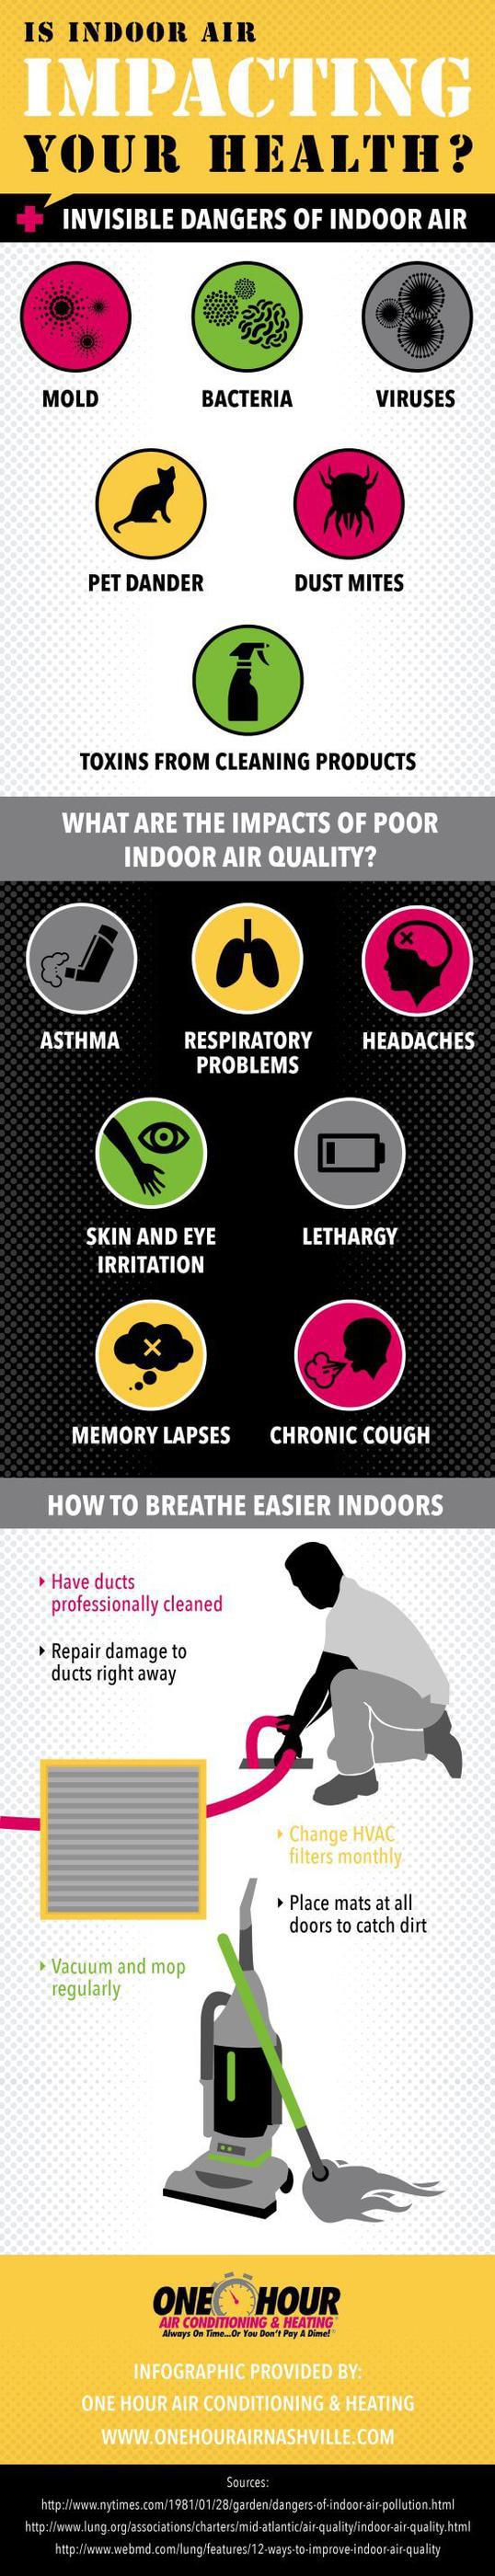 Is Indoor Air Impacting Your Health? [Infographic]